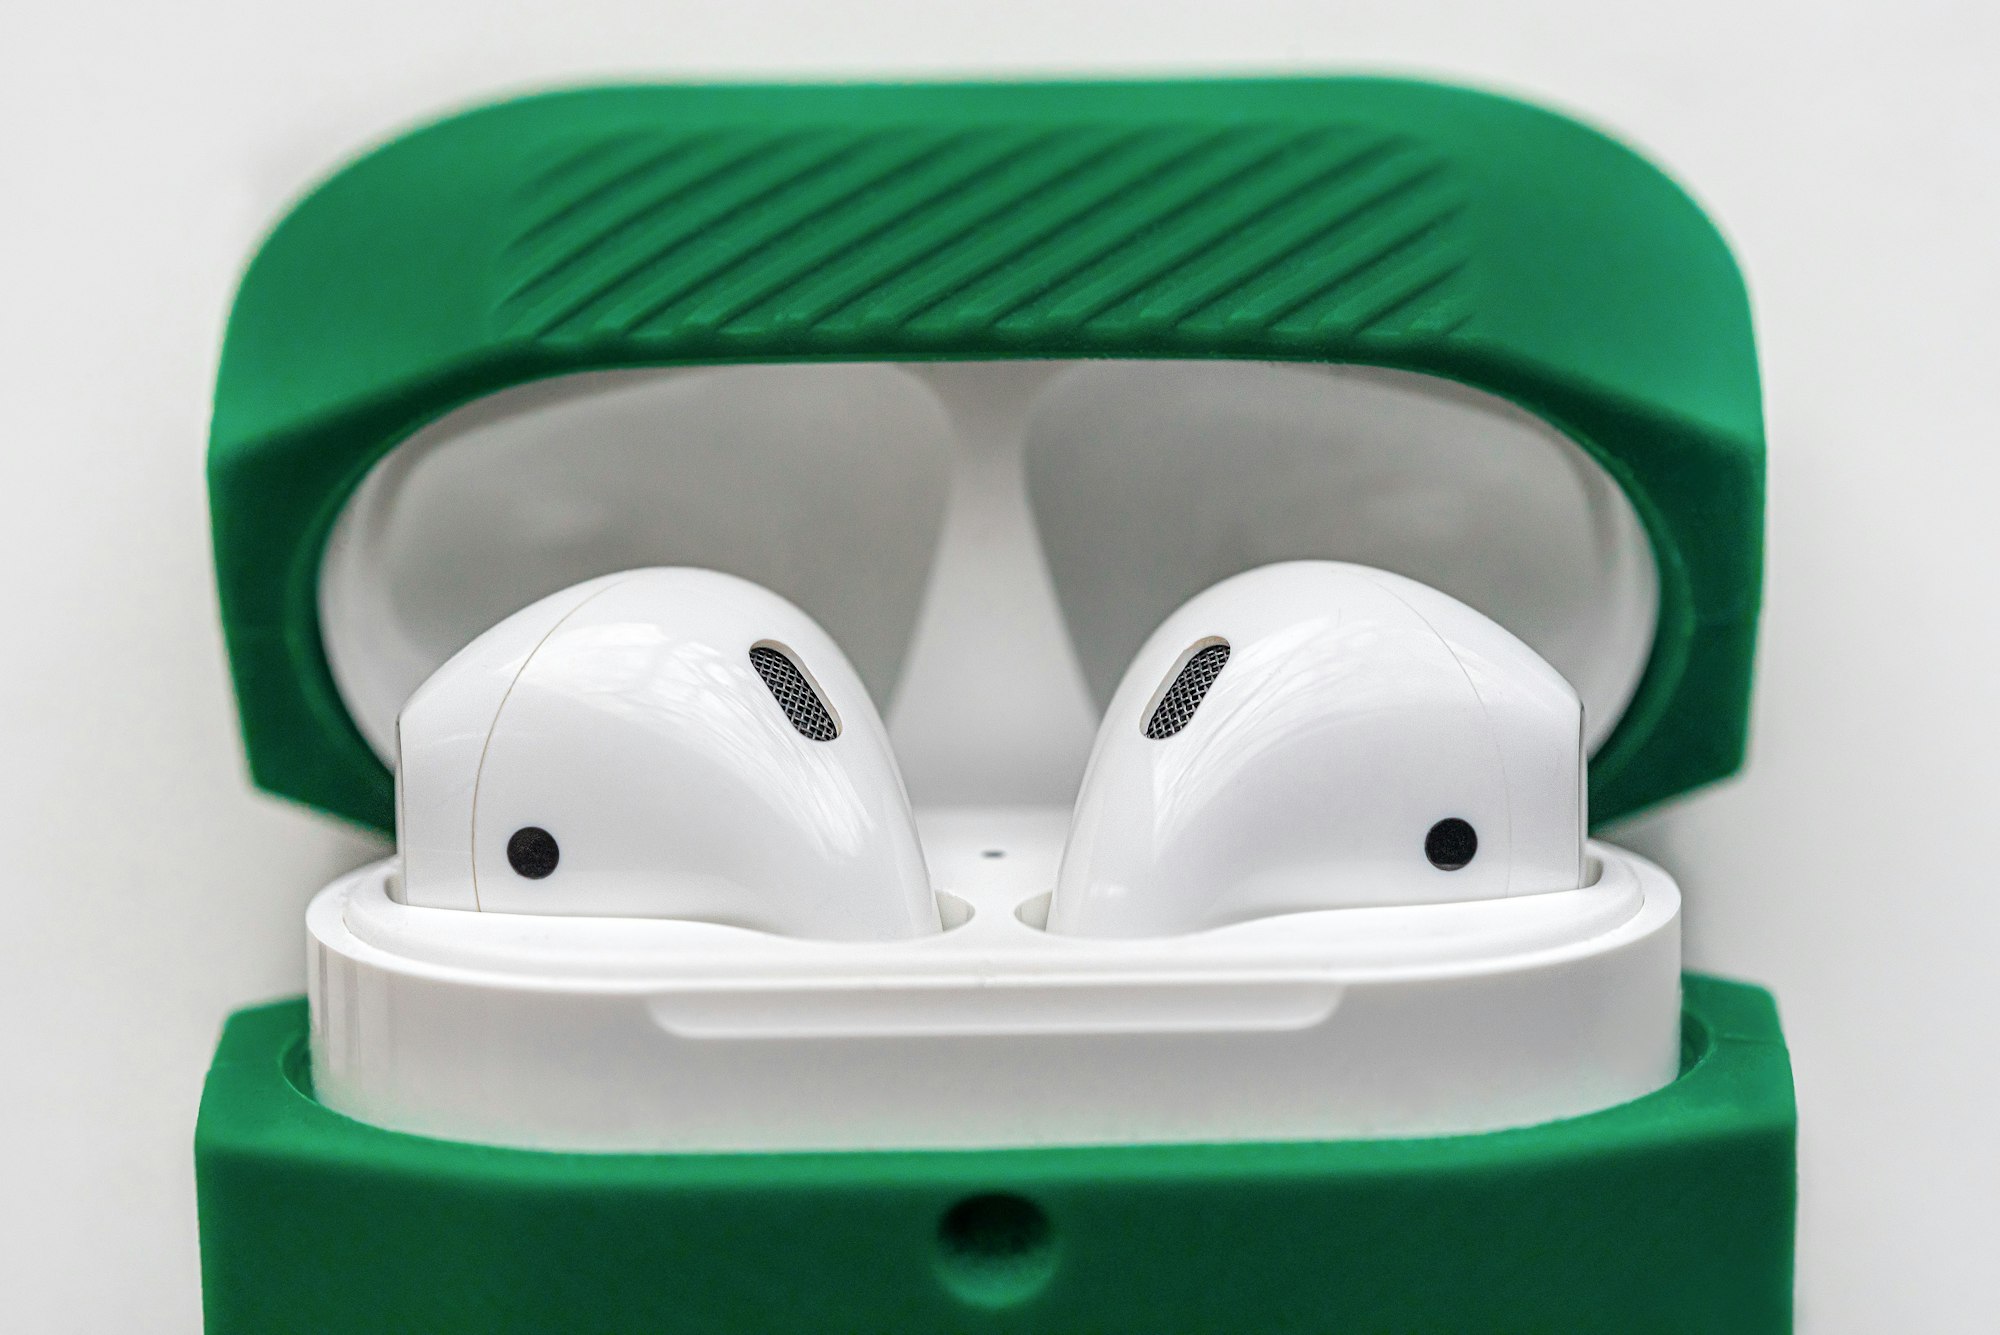 How to activate conversation awareness while using AirPods